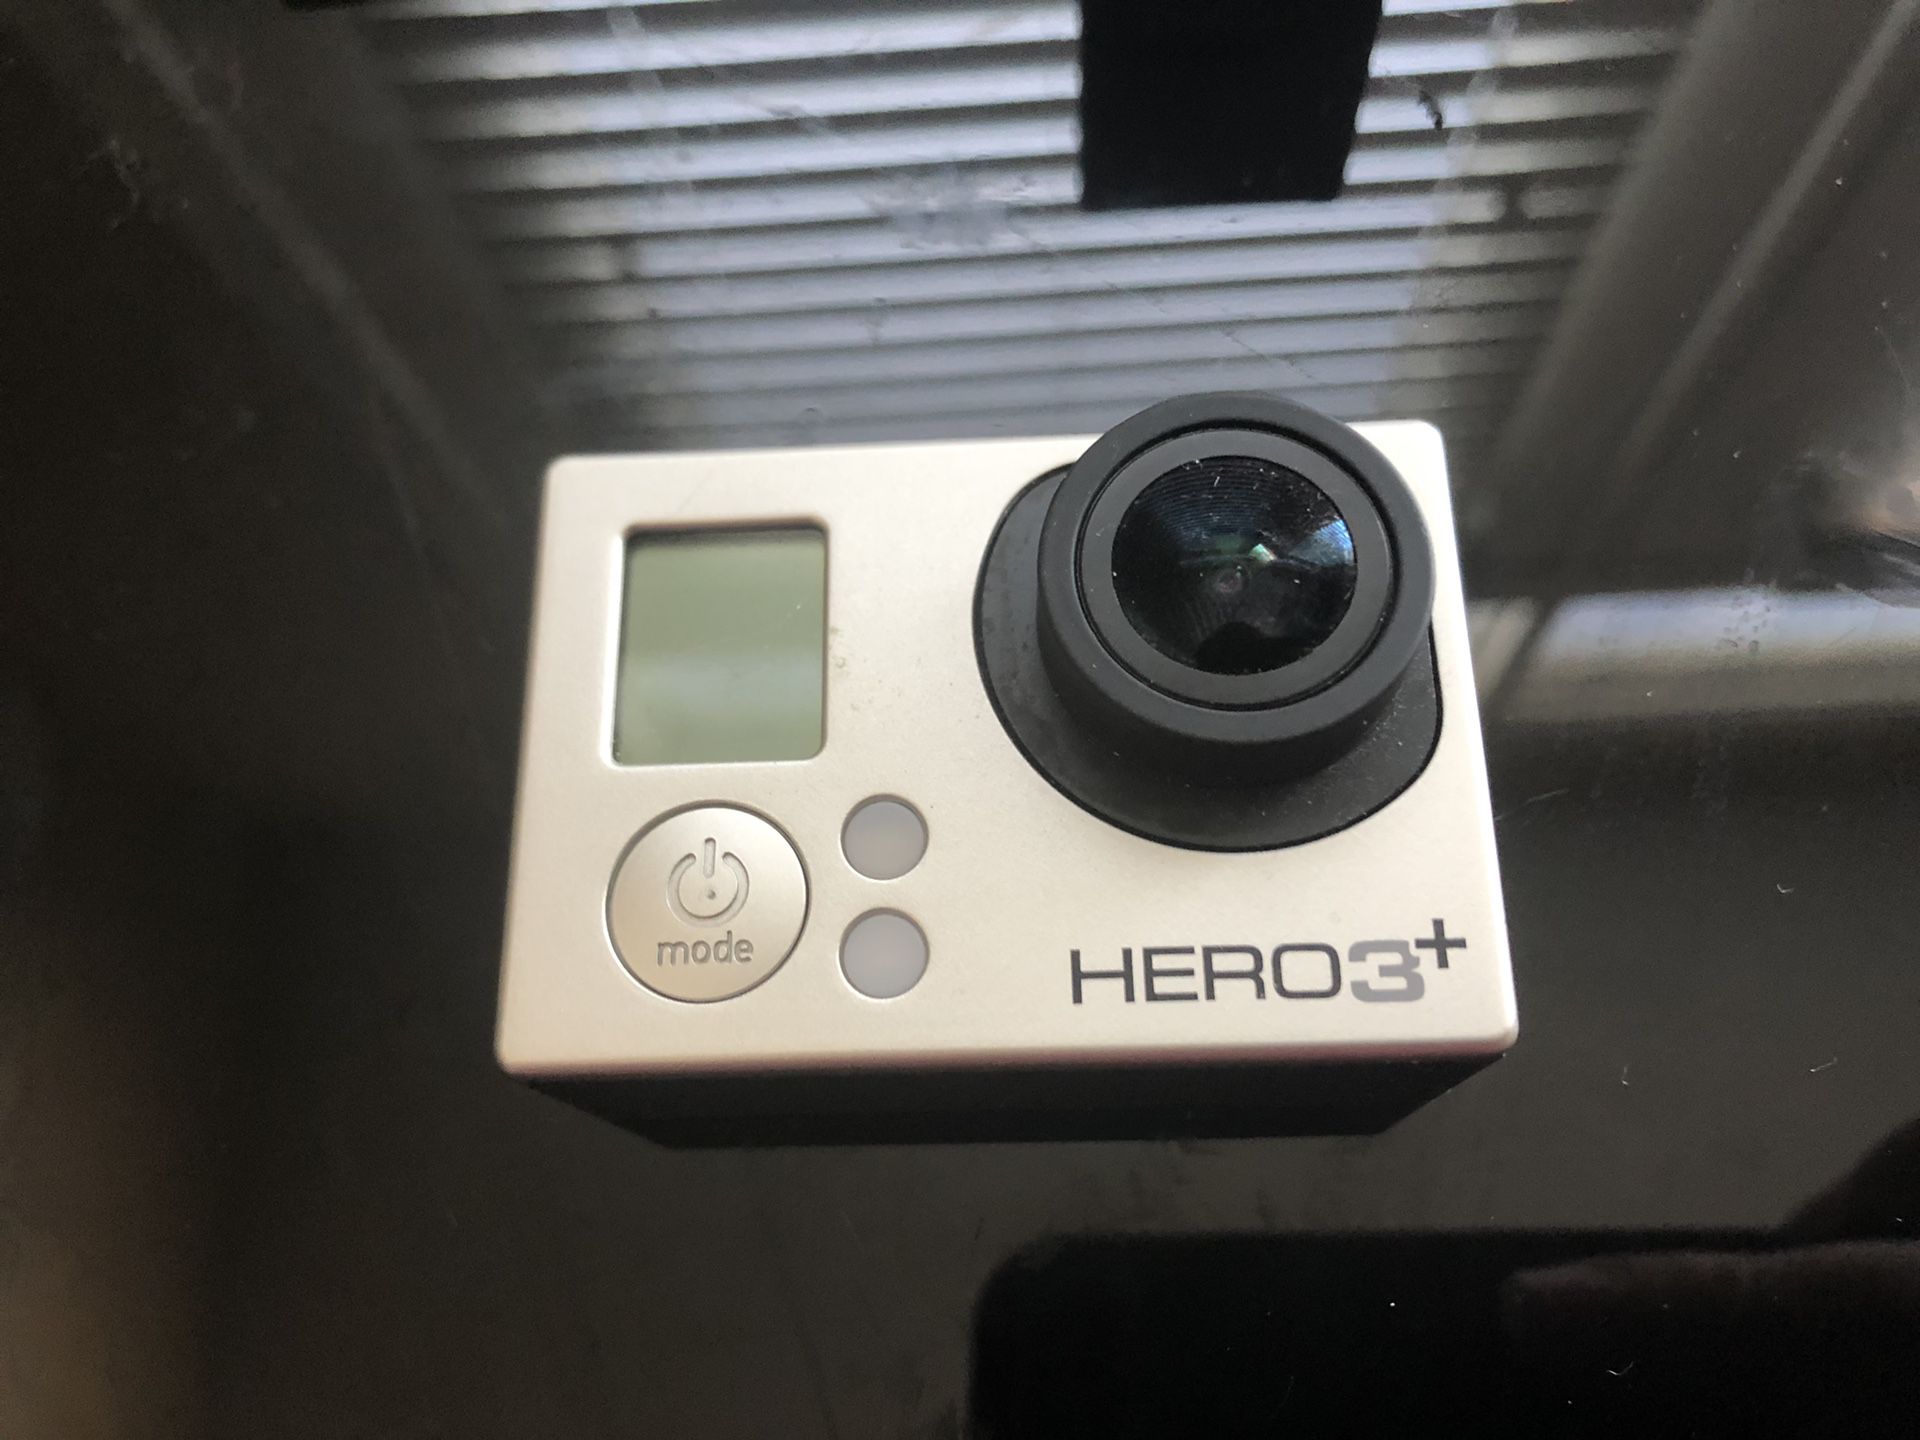 Gopro hero 3+ and a bunch of accessories